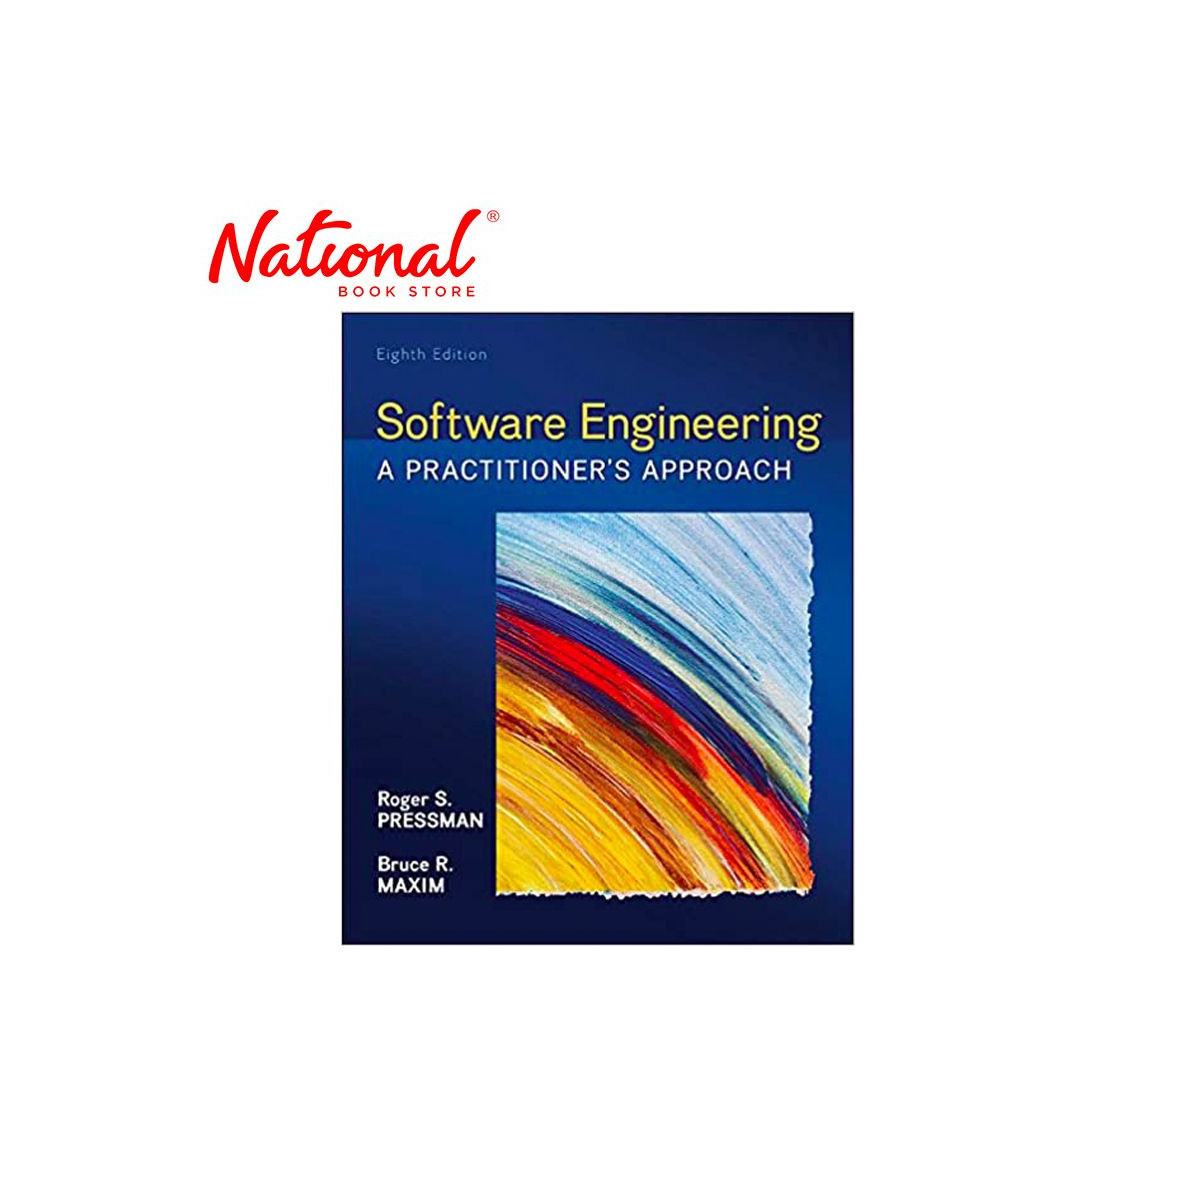 Software Engineering: A Practitioner Approach 8Th Edition Trade Paperback by Roger S. Pressman